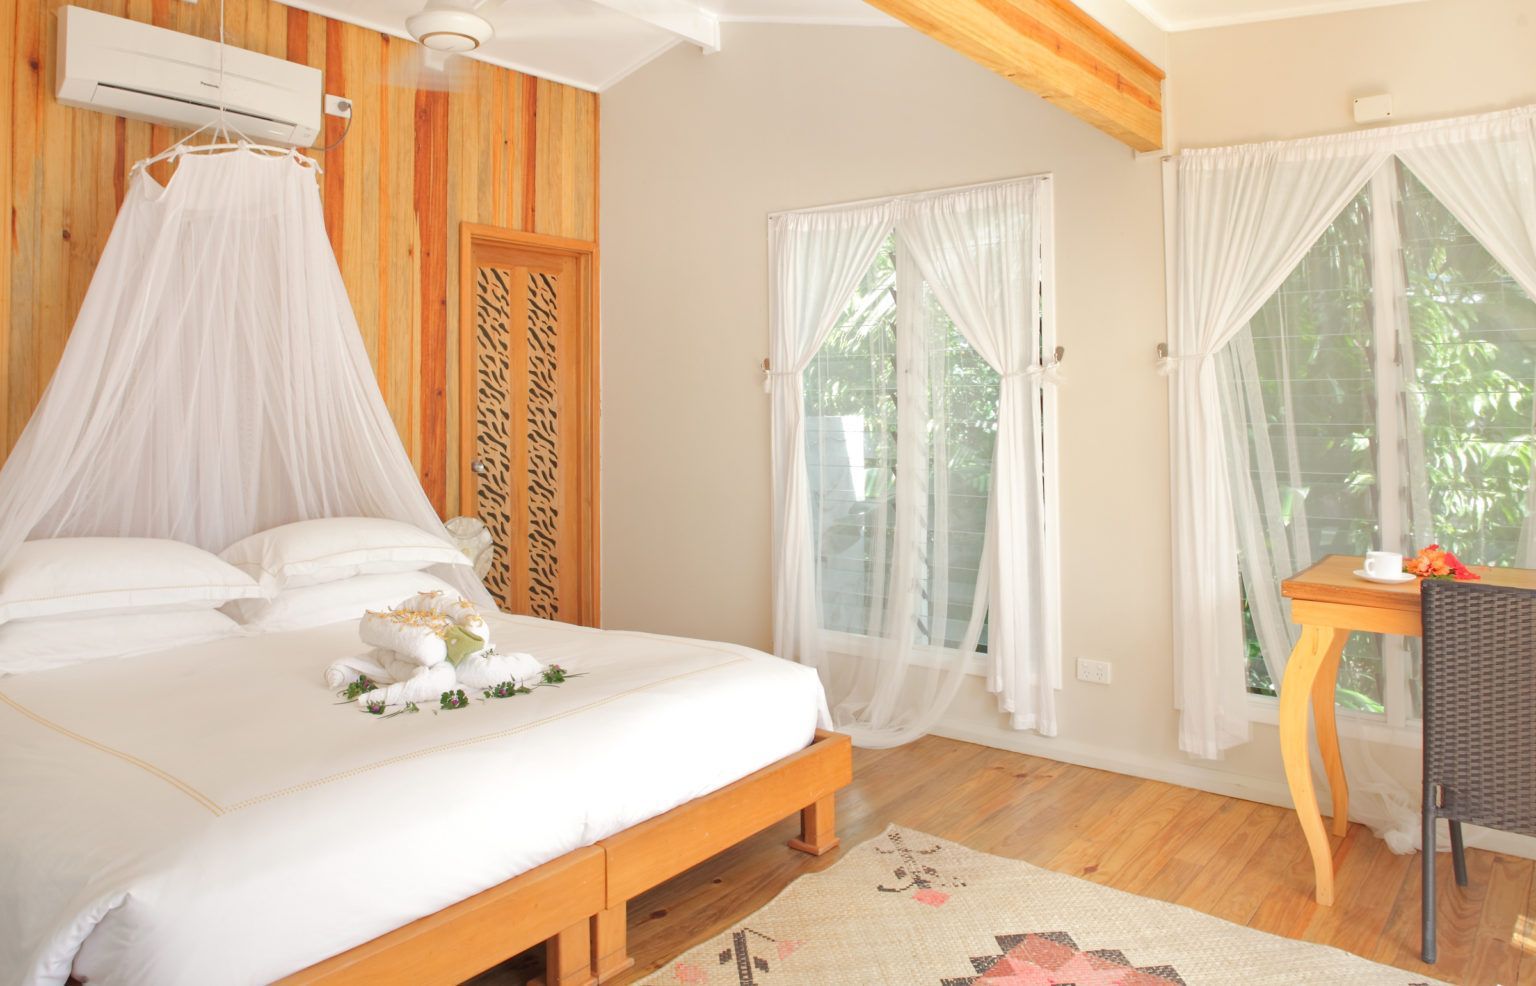 A double bed in a light and airy deluxe beach front bure at Sau Bay  Resort Fiji 